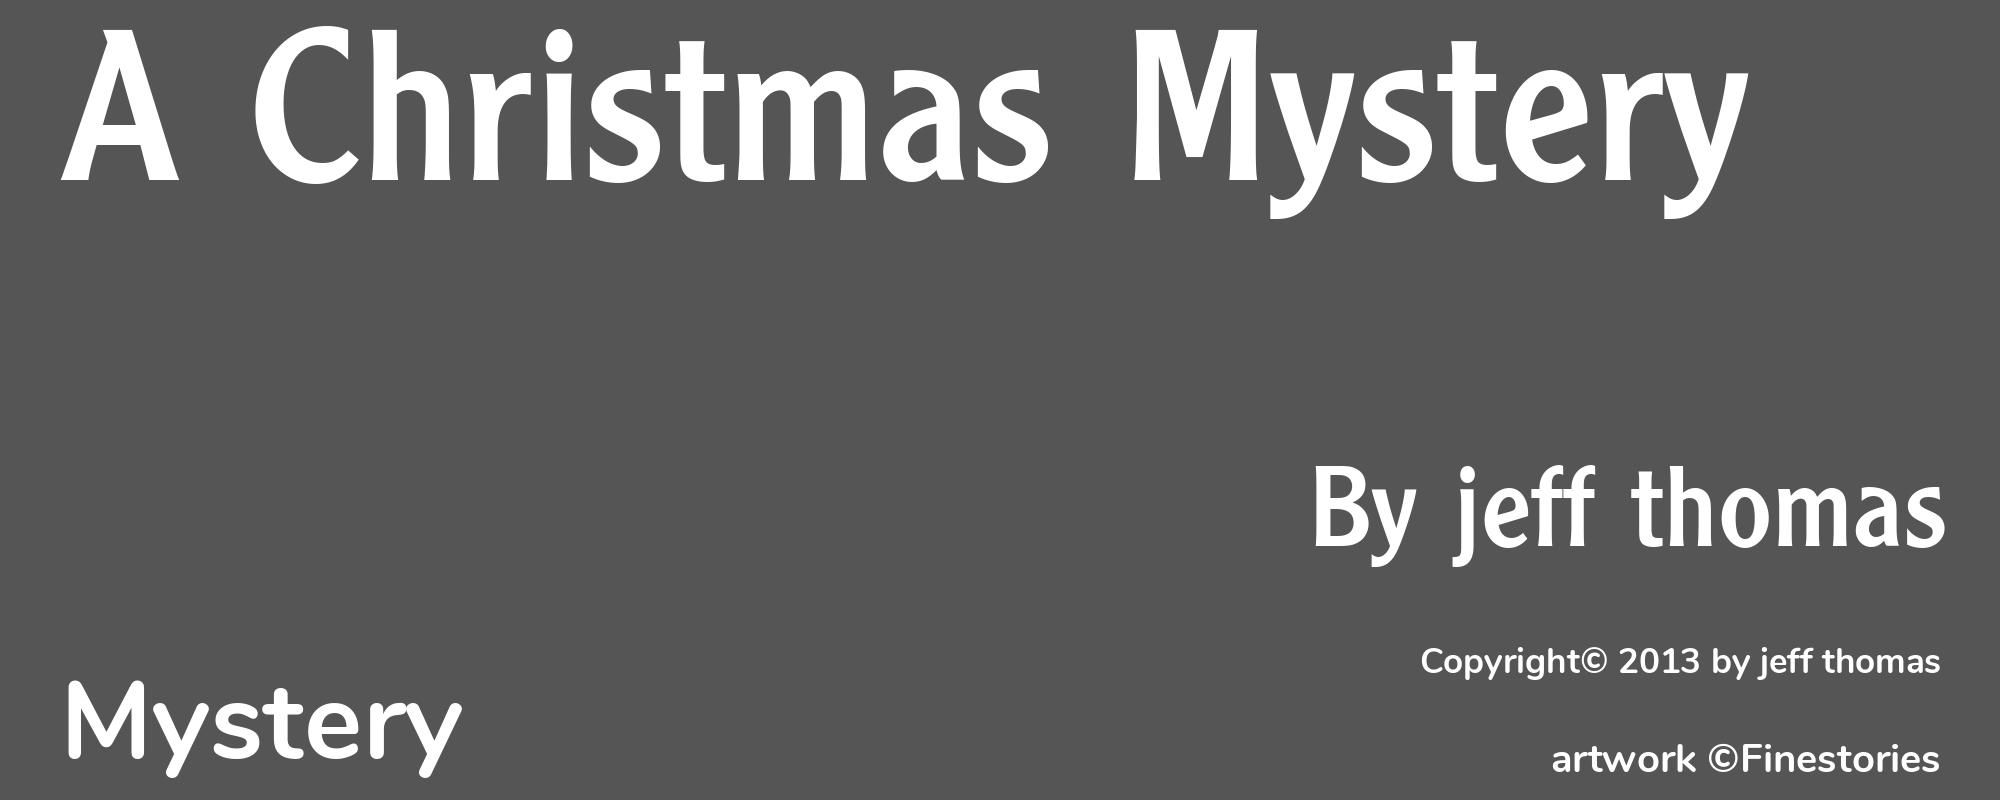 A Christmas Mystery - Cover